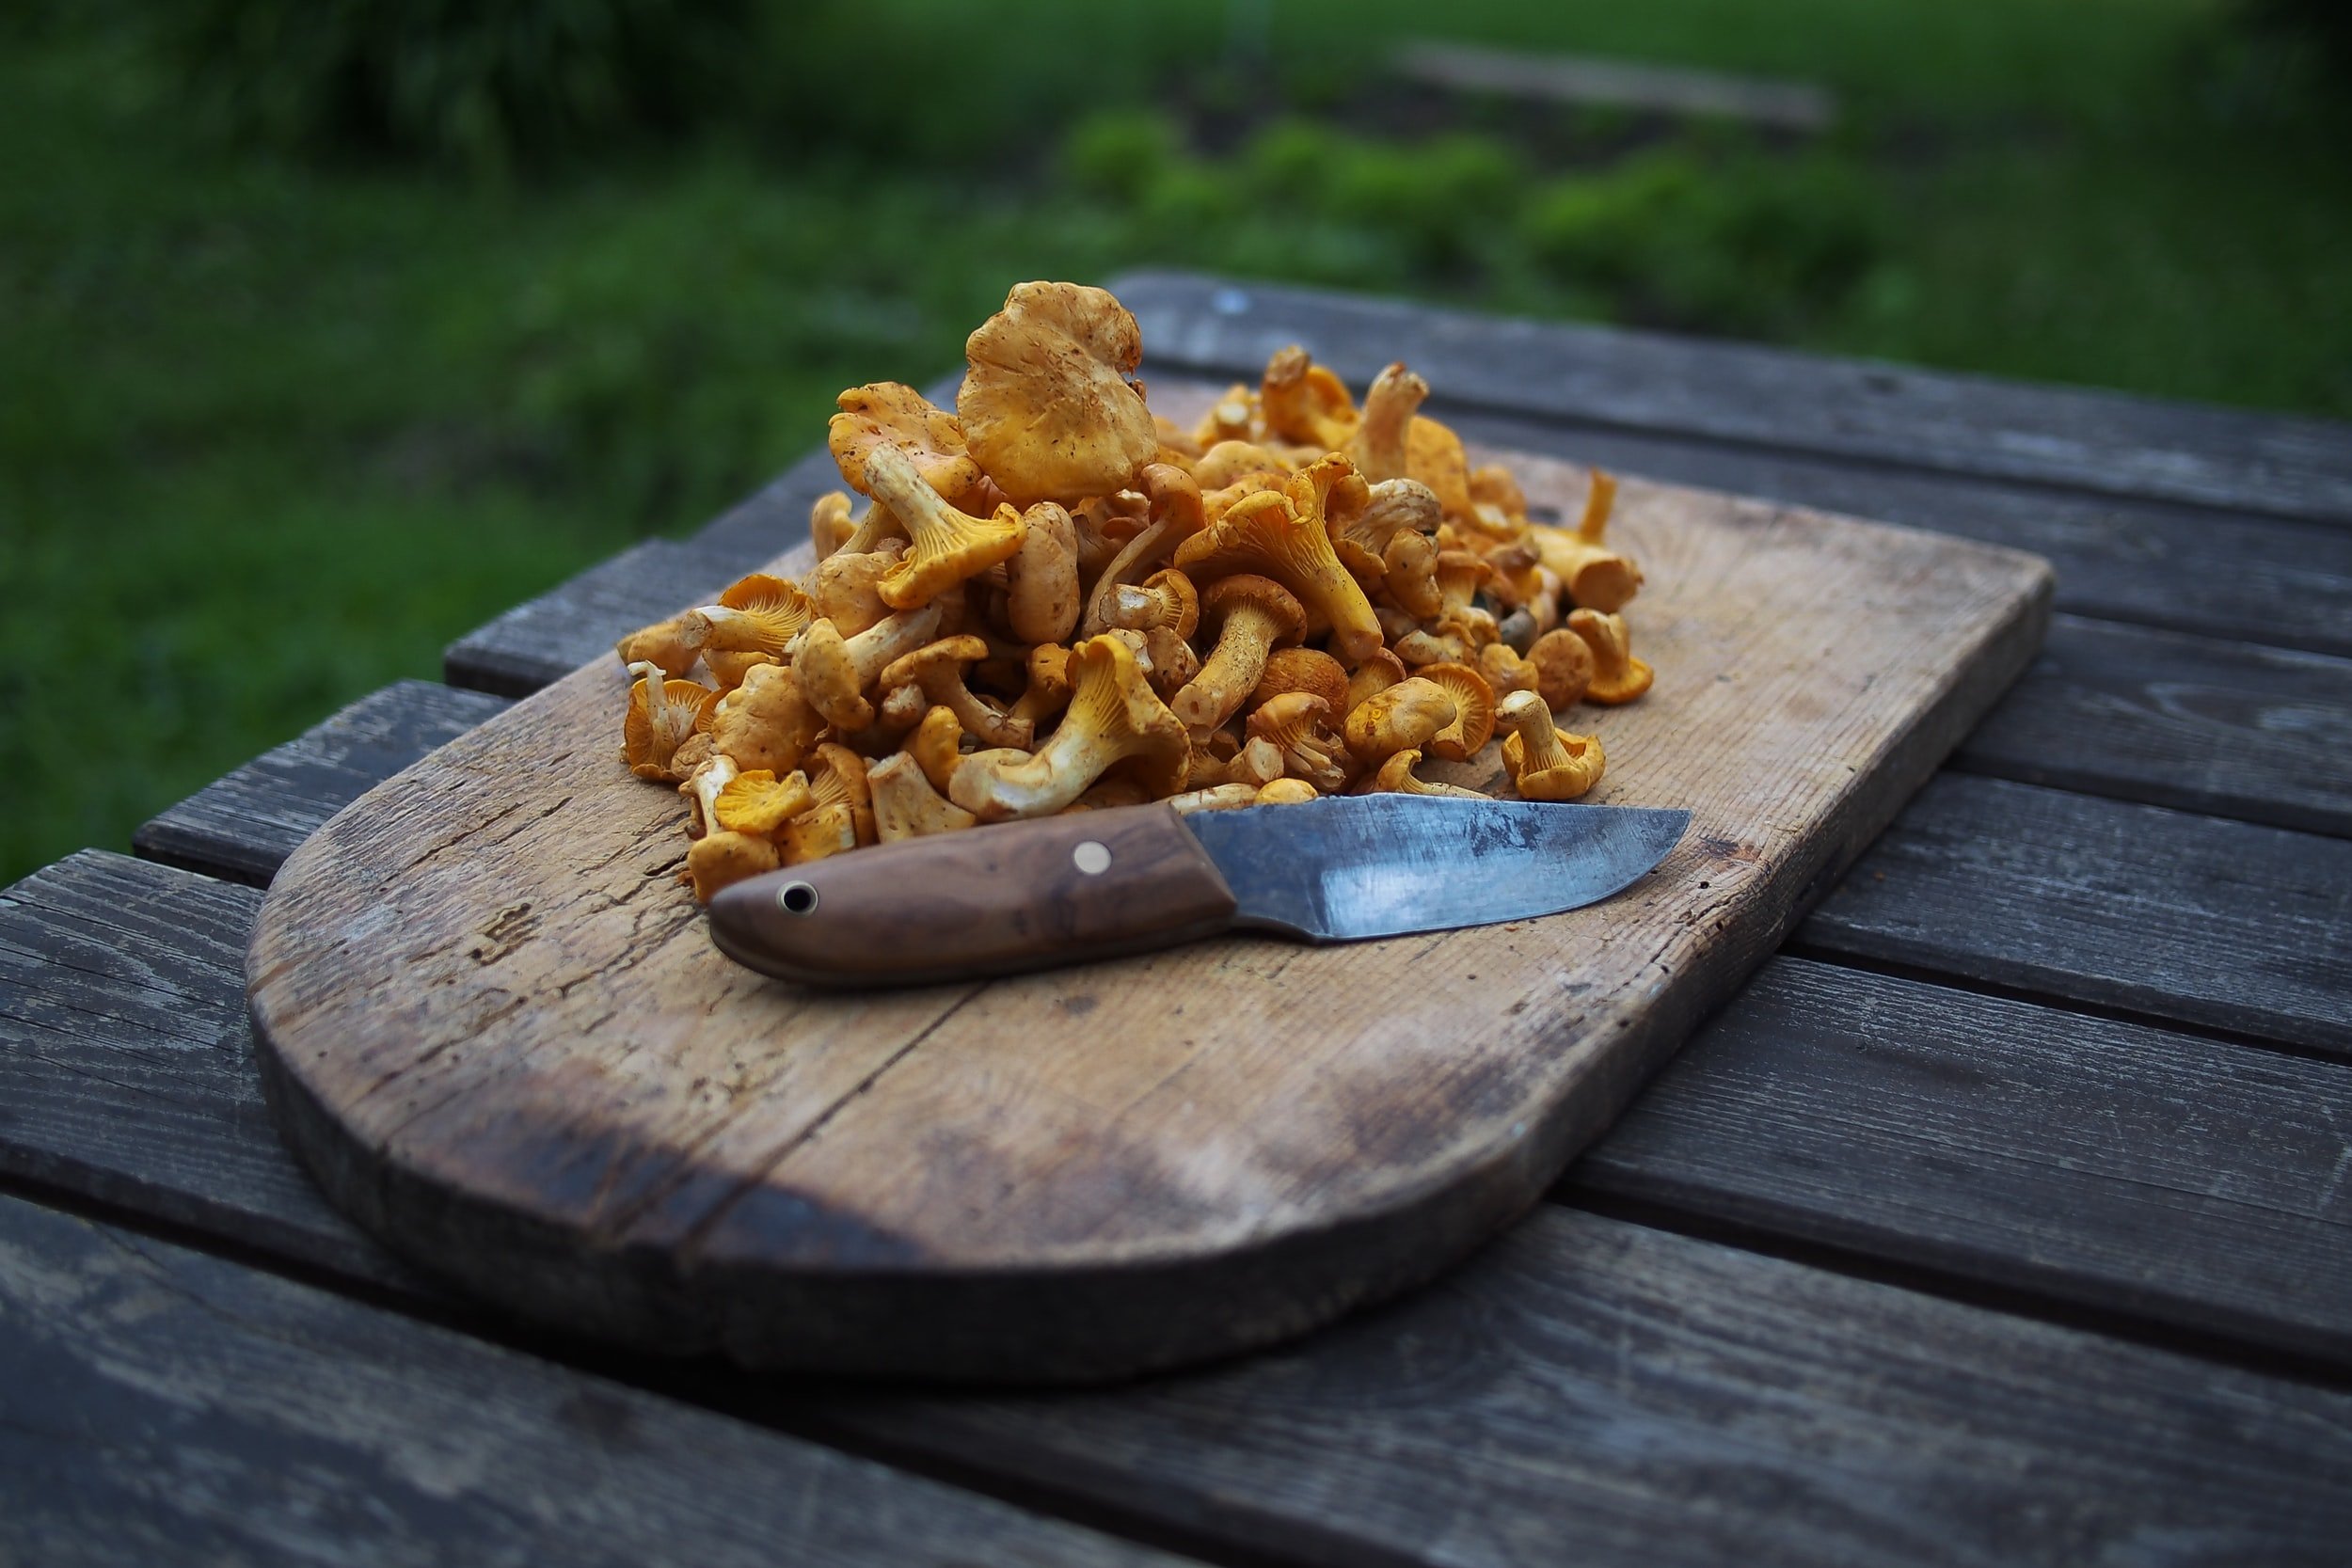 Our Diets Have Much Room for Mushrooms—Wild Ones in Particular